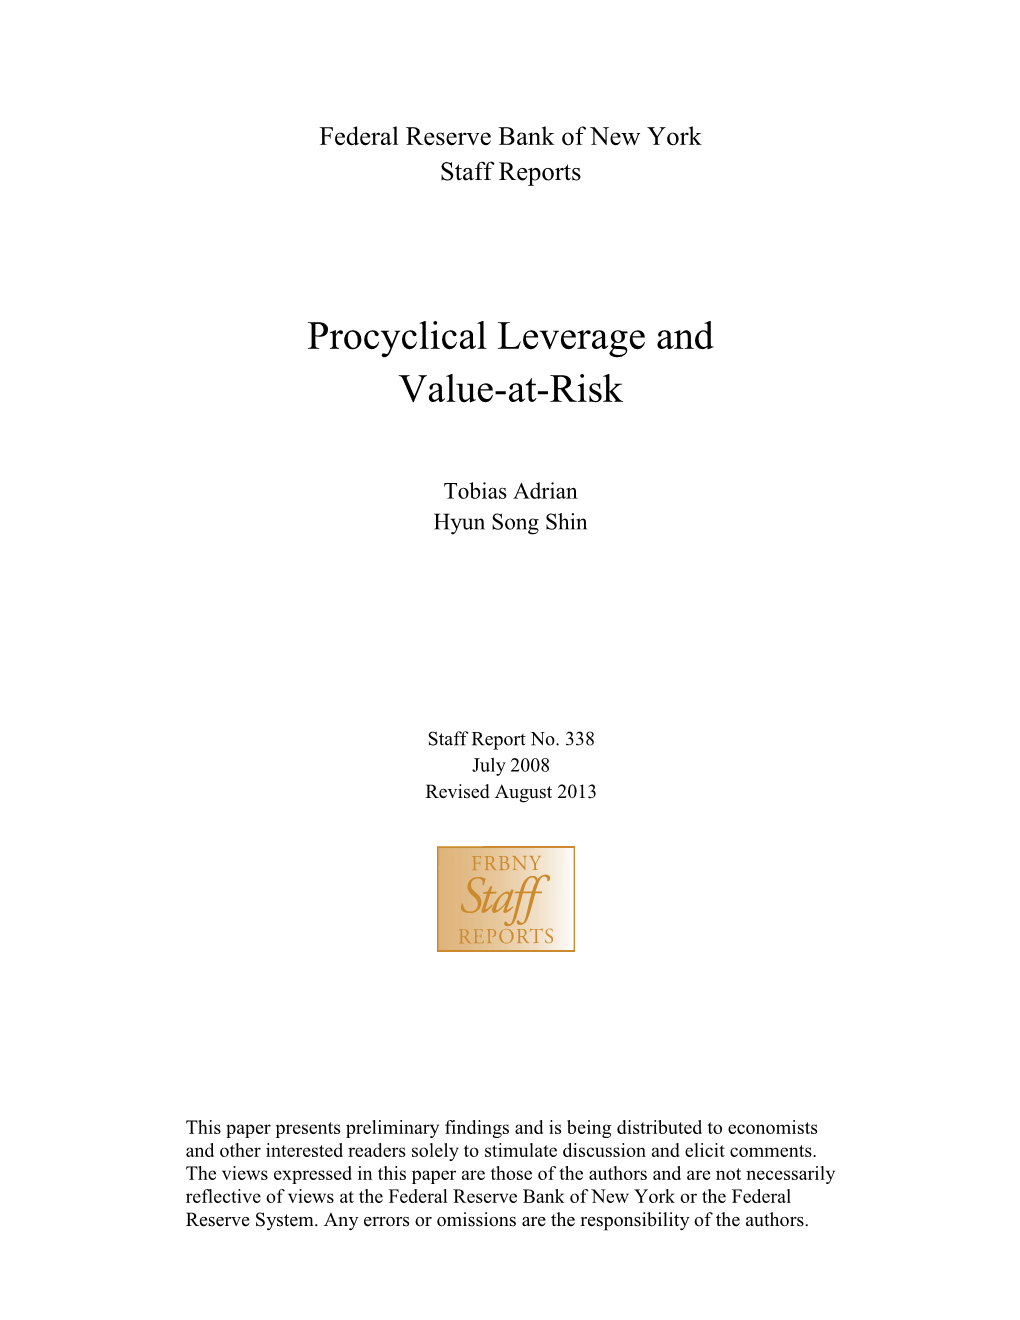 Procyclical Leverage and Value-At-Risk